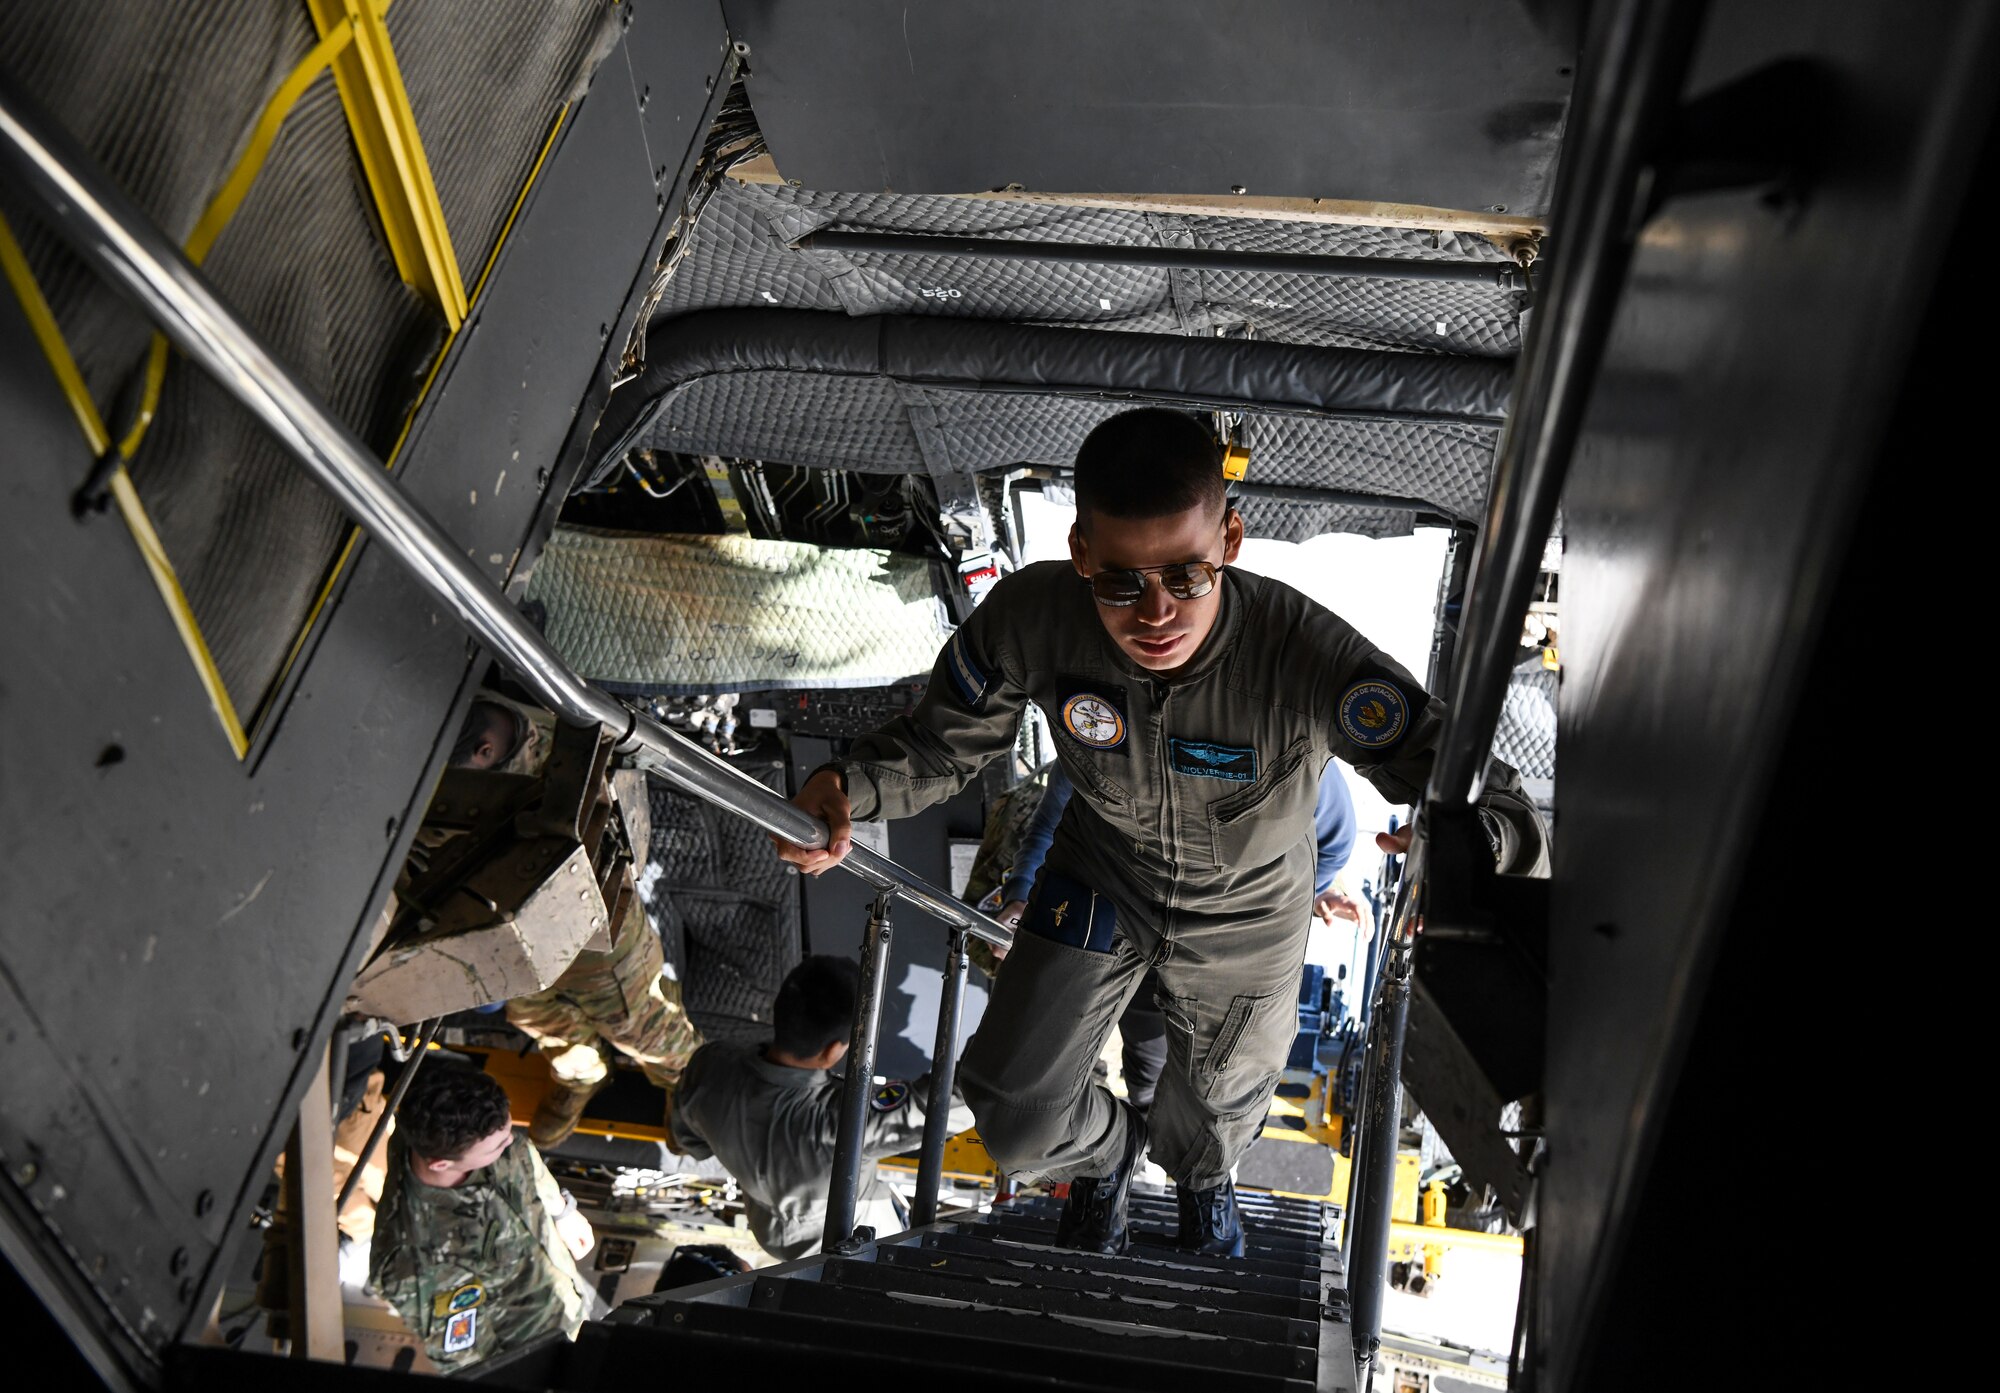 A Honduran cadet climbs the troop compartment stairs on a C-5M Super Galaxy during their visit Oct. 17, 2019, at Dover Air Force Base, Del. The aircraft can fly 2,150 nautical miles with a cargo load of 281,001 pounds. (U.S. Air Force photo by Senior Airman Christopher Quail)